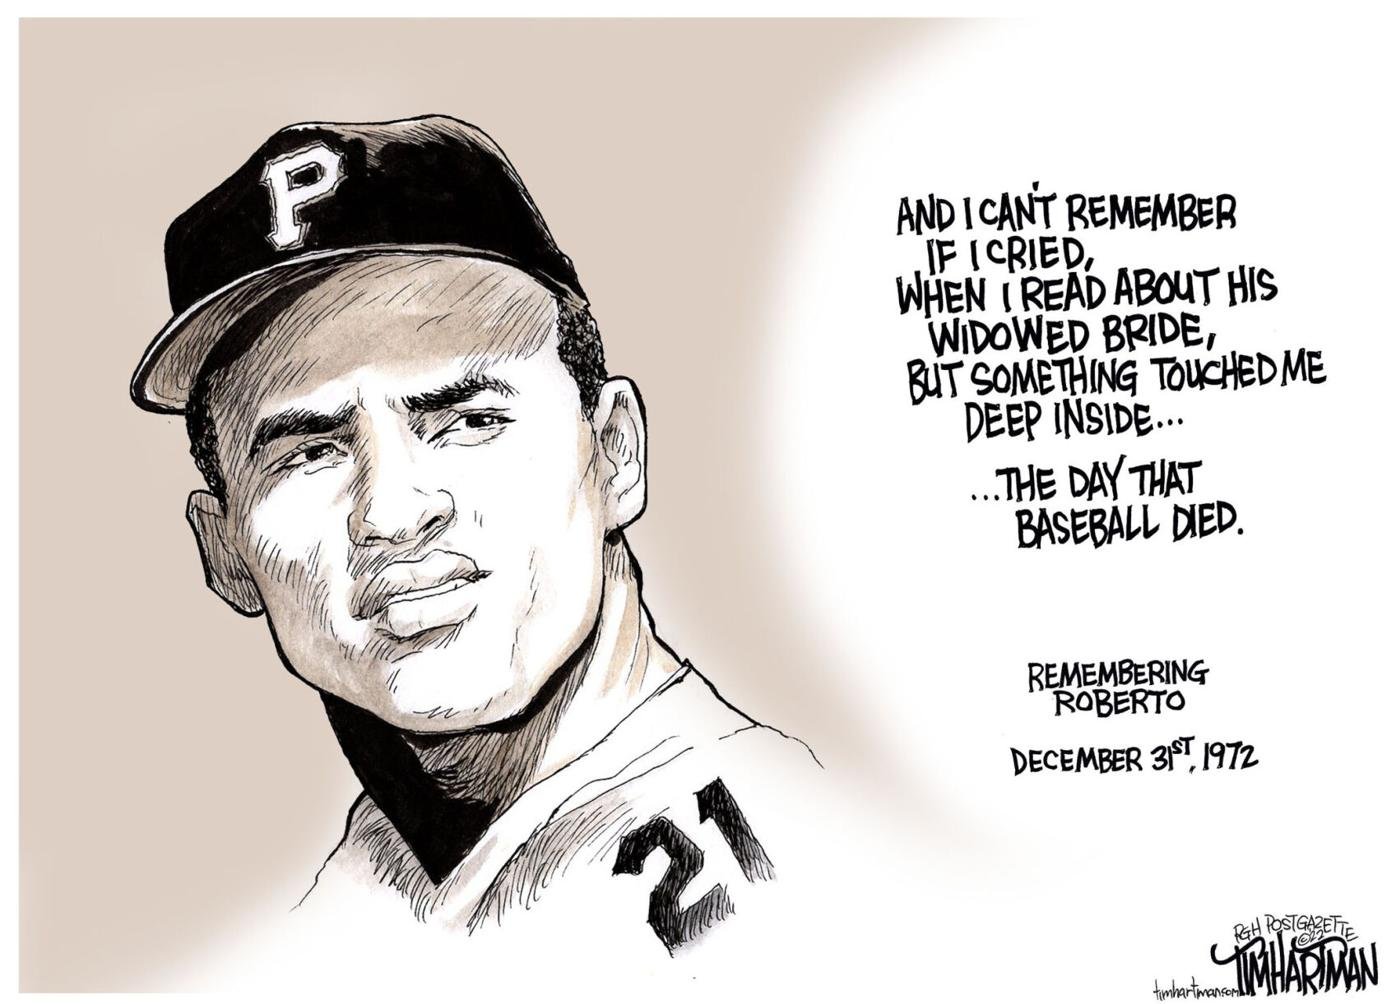 Are you related to Roberto Clemente? • FamilySearch